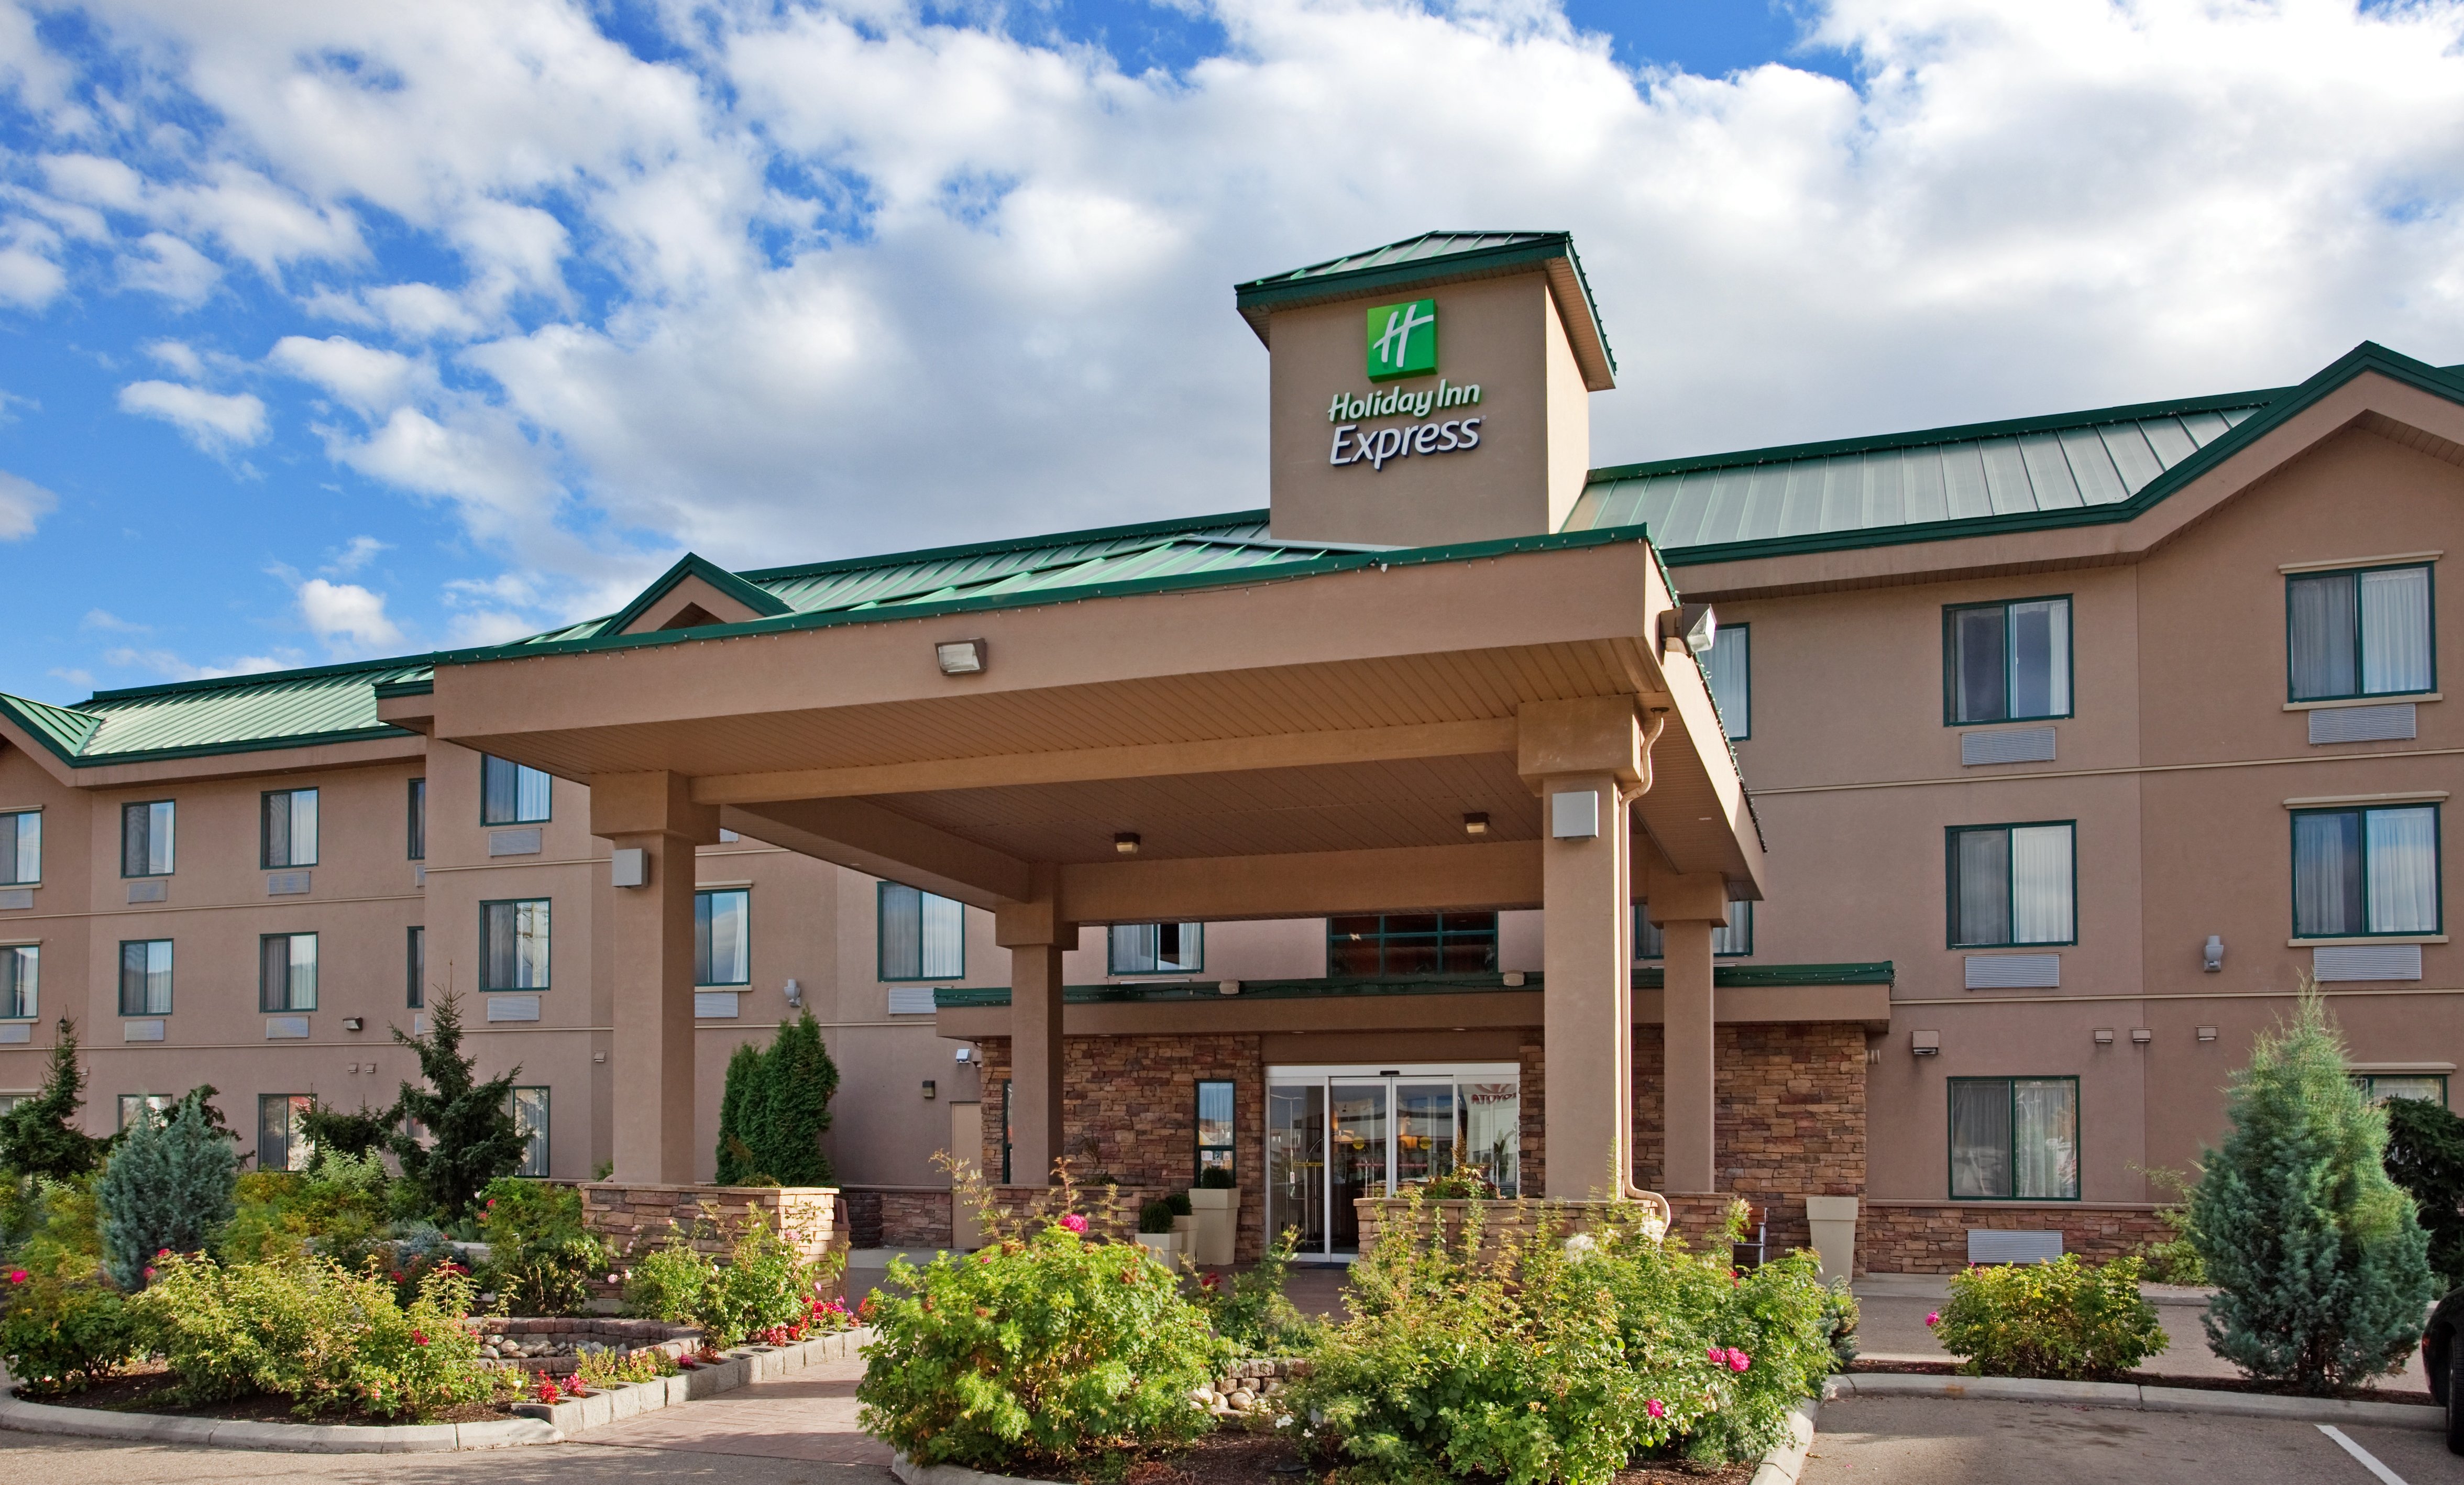 Holiday Inn Express welcomes you to beautiful Vernon BC